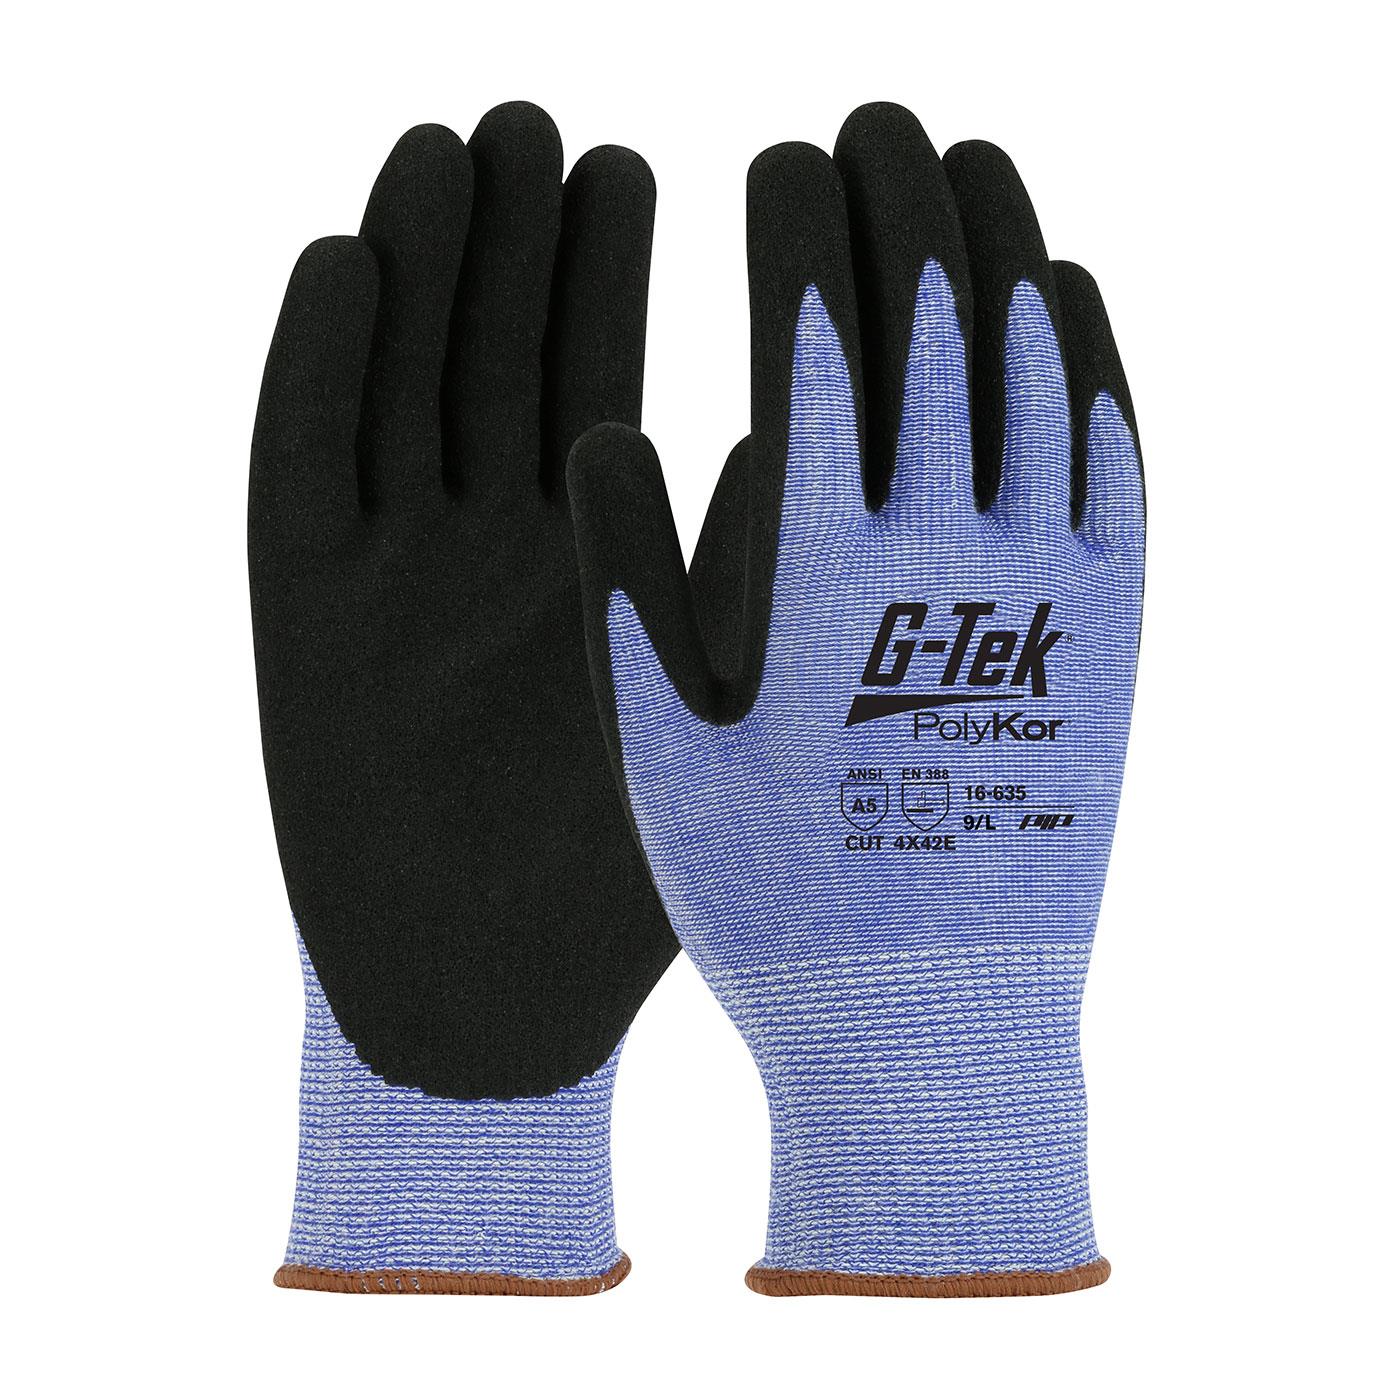 G-TEK POLYKOR 16-635 MICROSURFACE PALM - Tagged Gloves